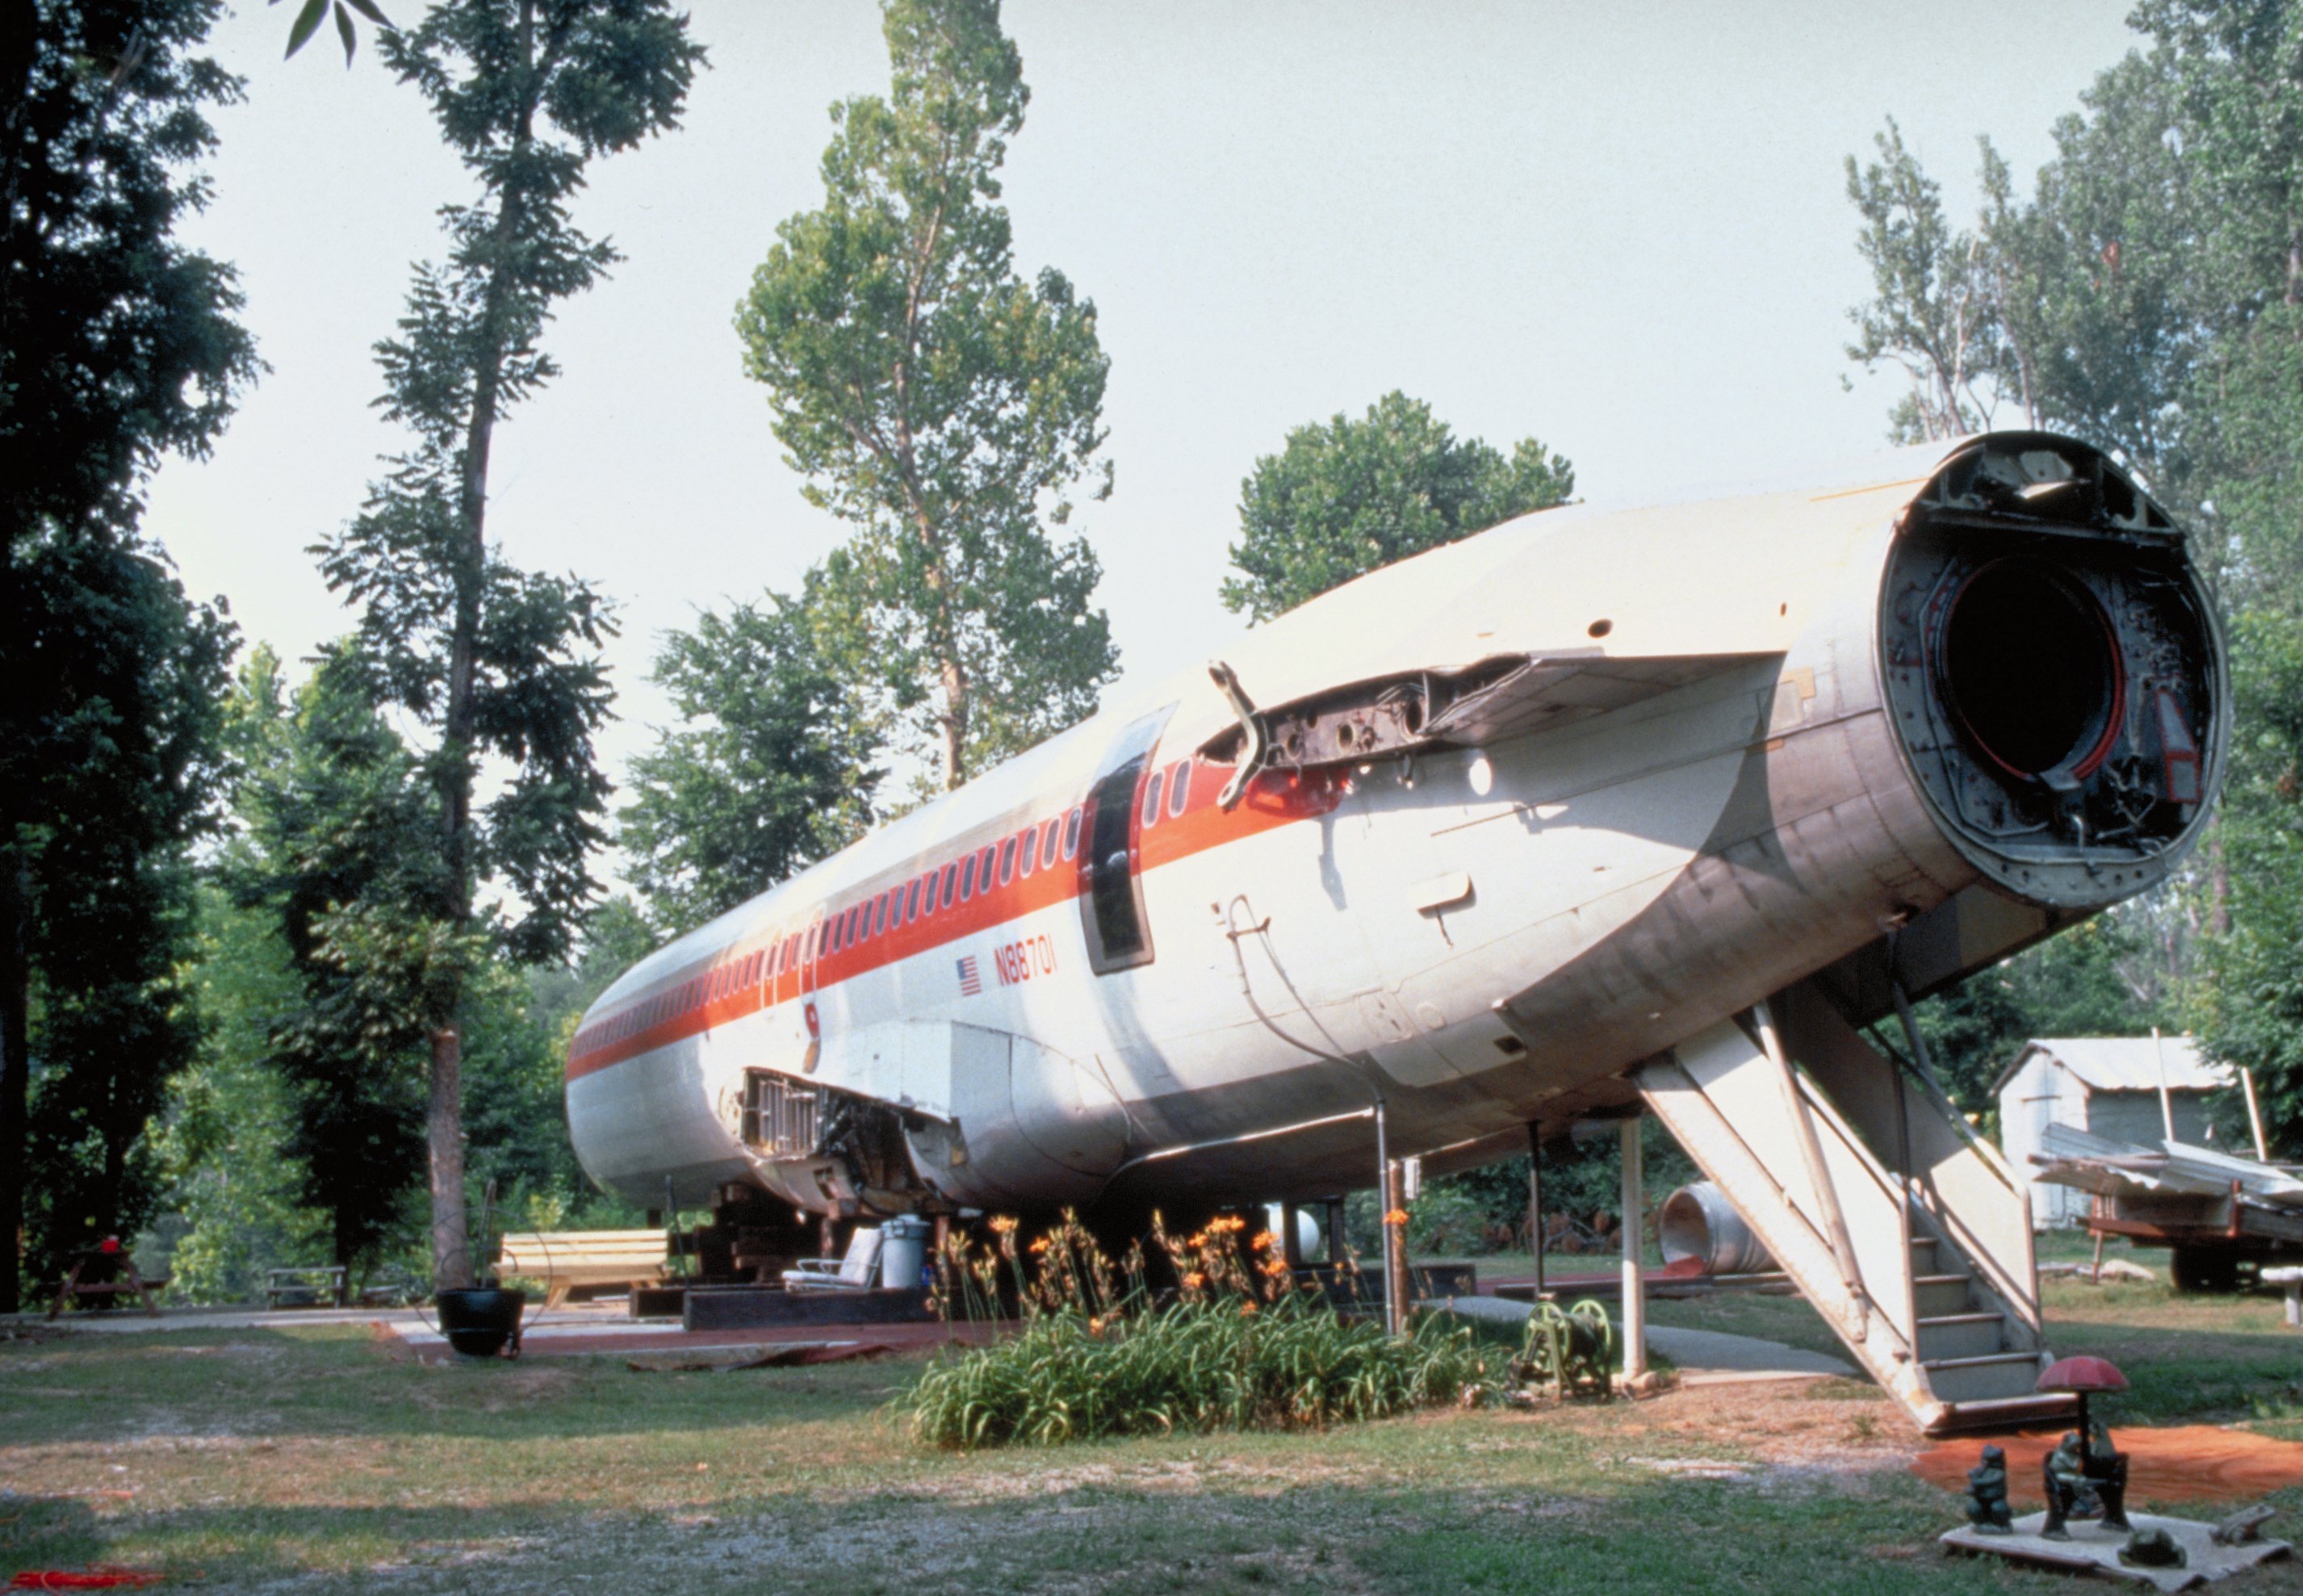 View from outside of Boeing 727 fuselage, which has been converted into 3 bedroom home by beautician Jo Ann Ussery. | Source: Getty Images